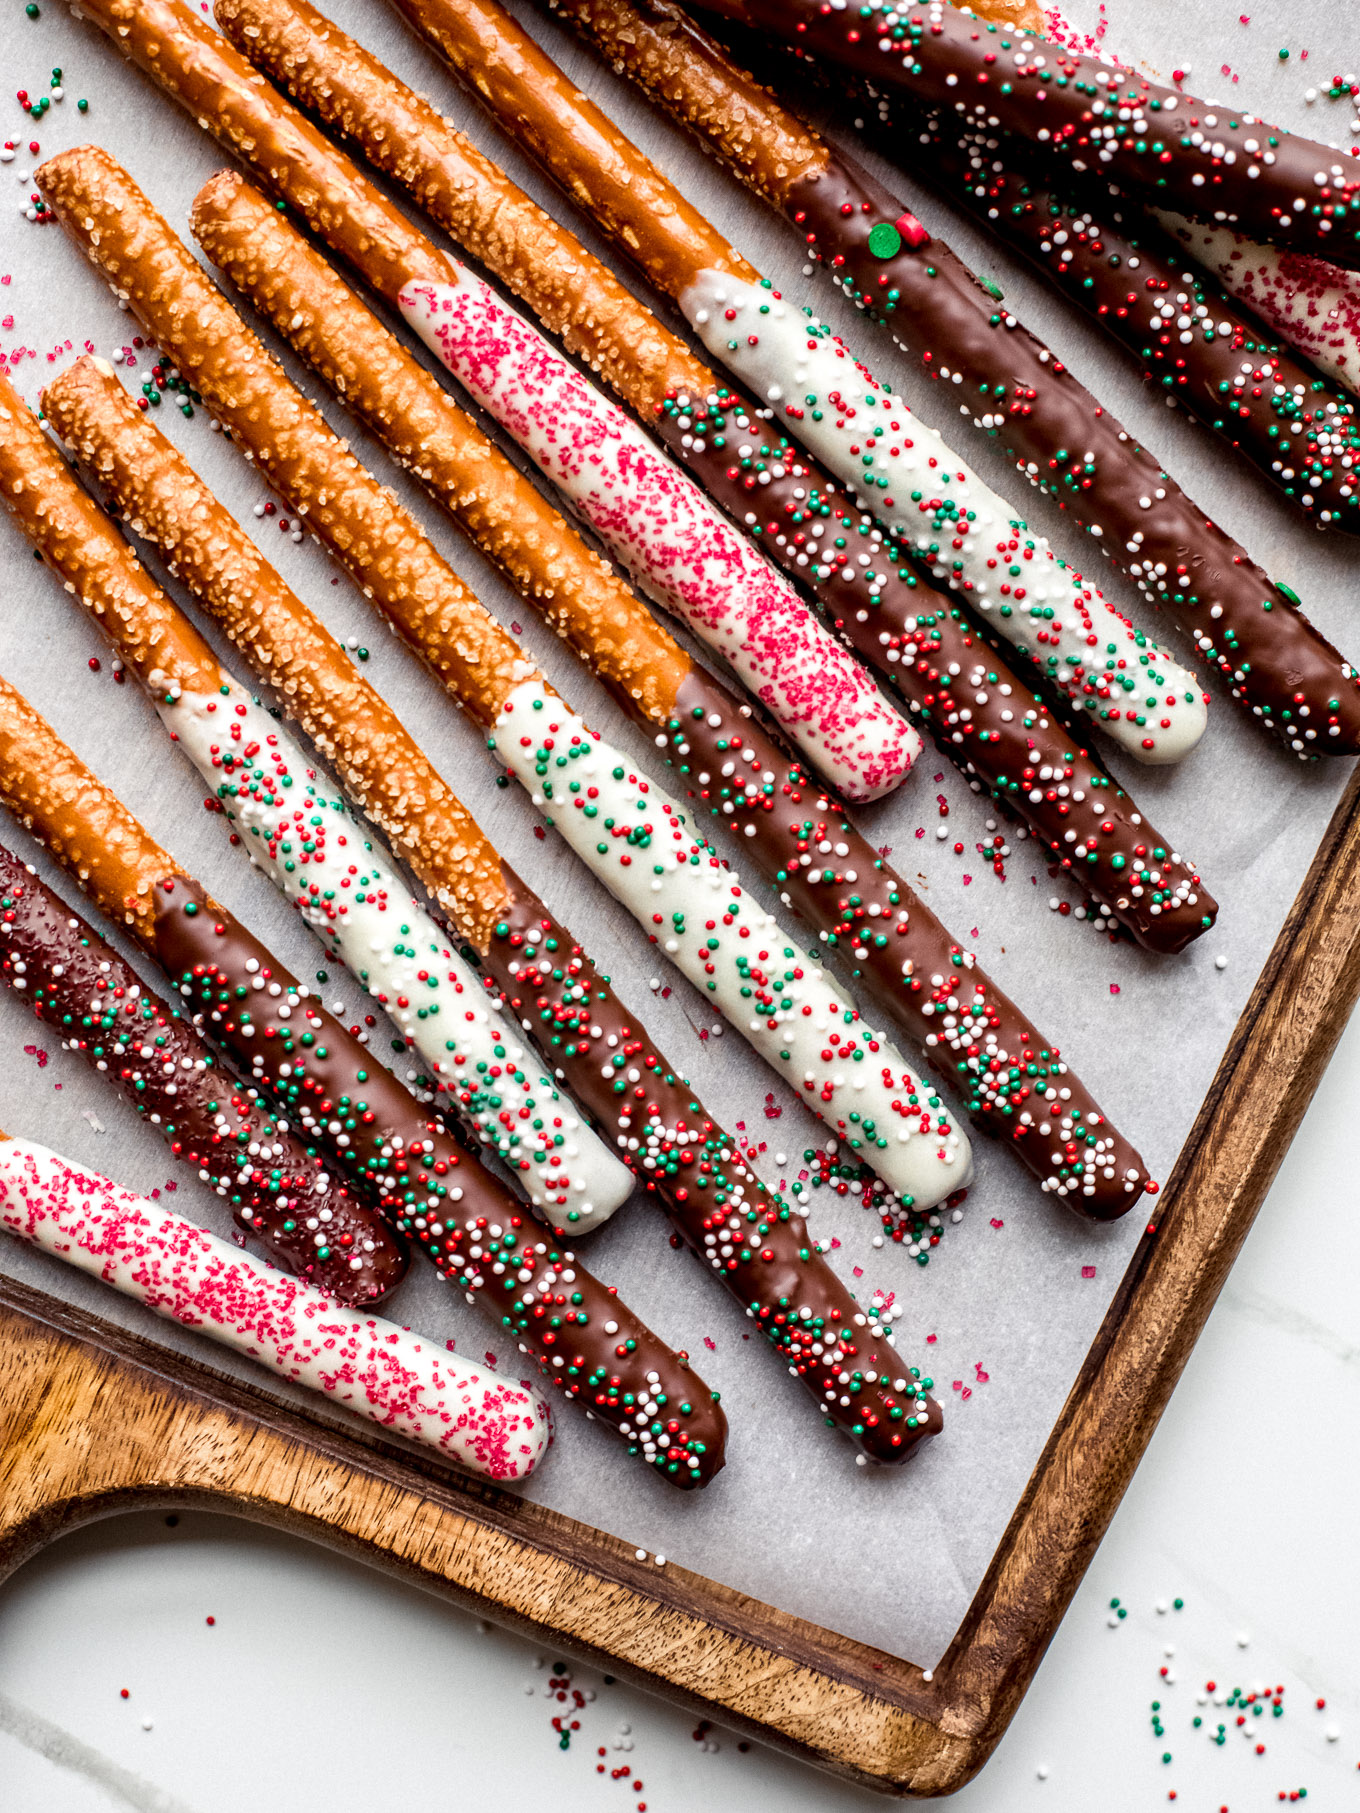 Easy Neighbor Christmas Gift Idea- Nutella and Pretzels with